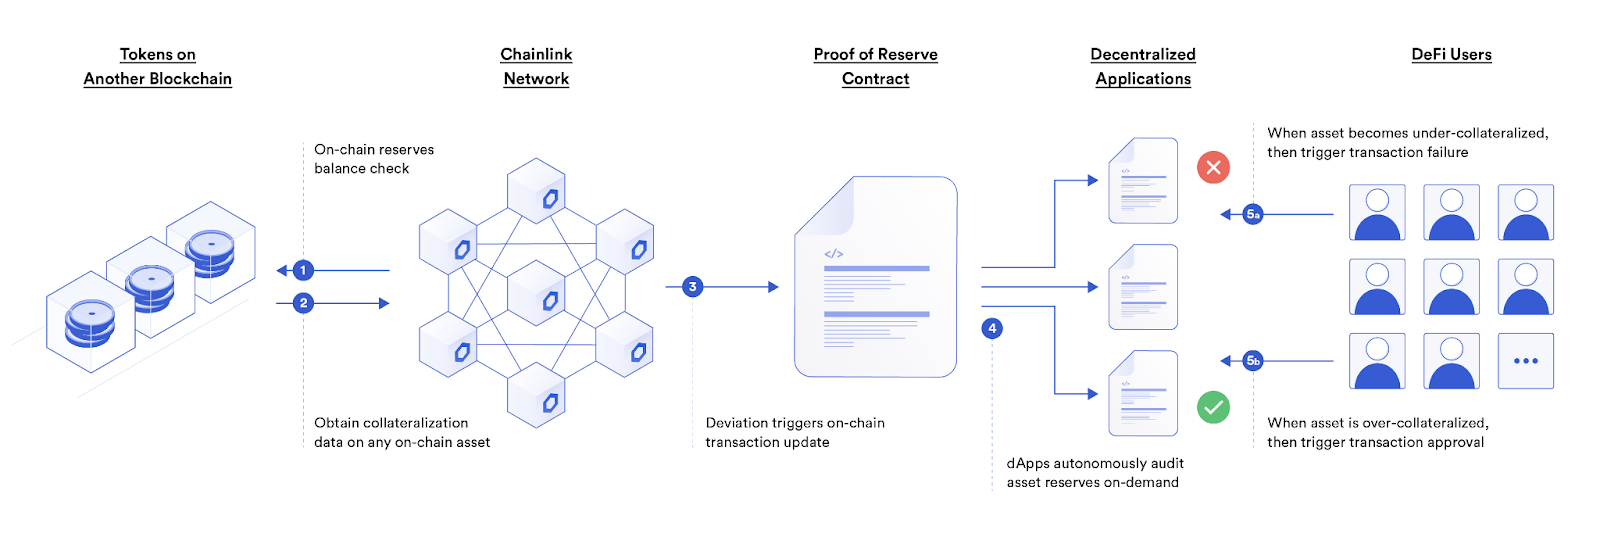  A diagram showing how Chainlink PoR helps secure wrapped tokens backed by on-chain reserves.